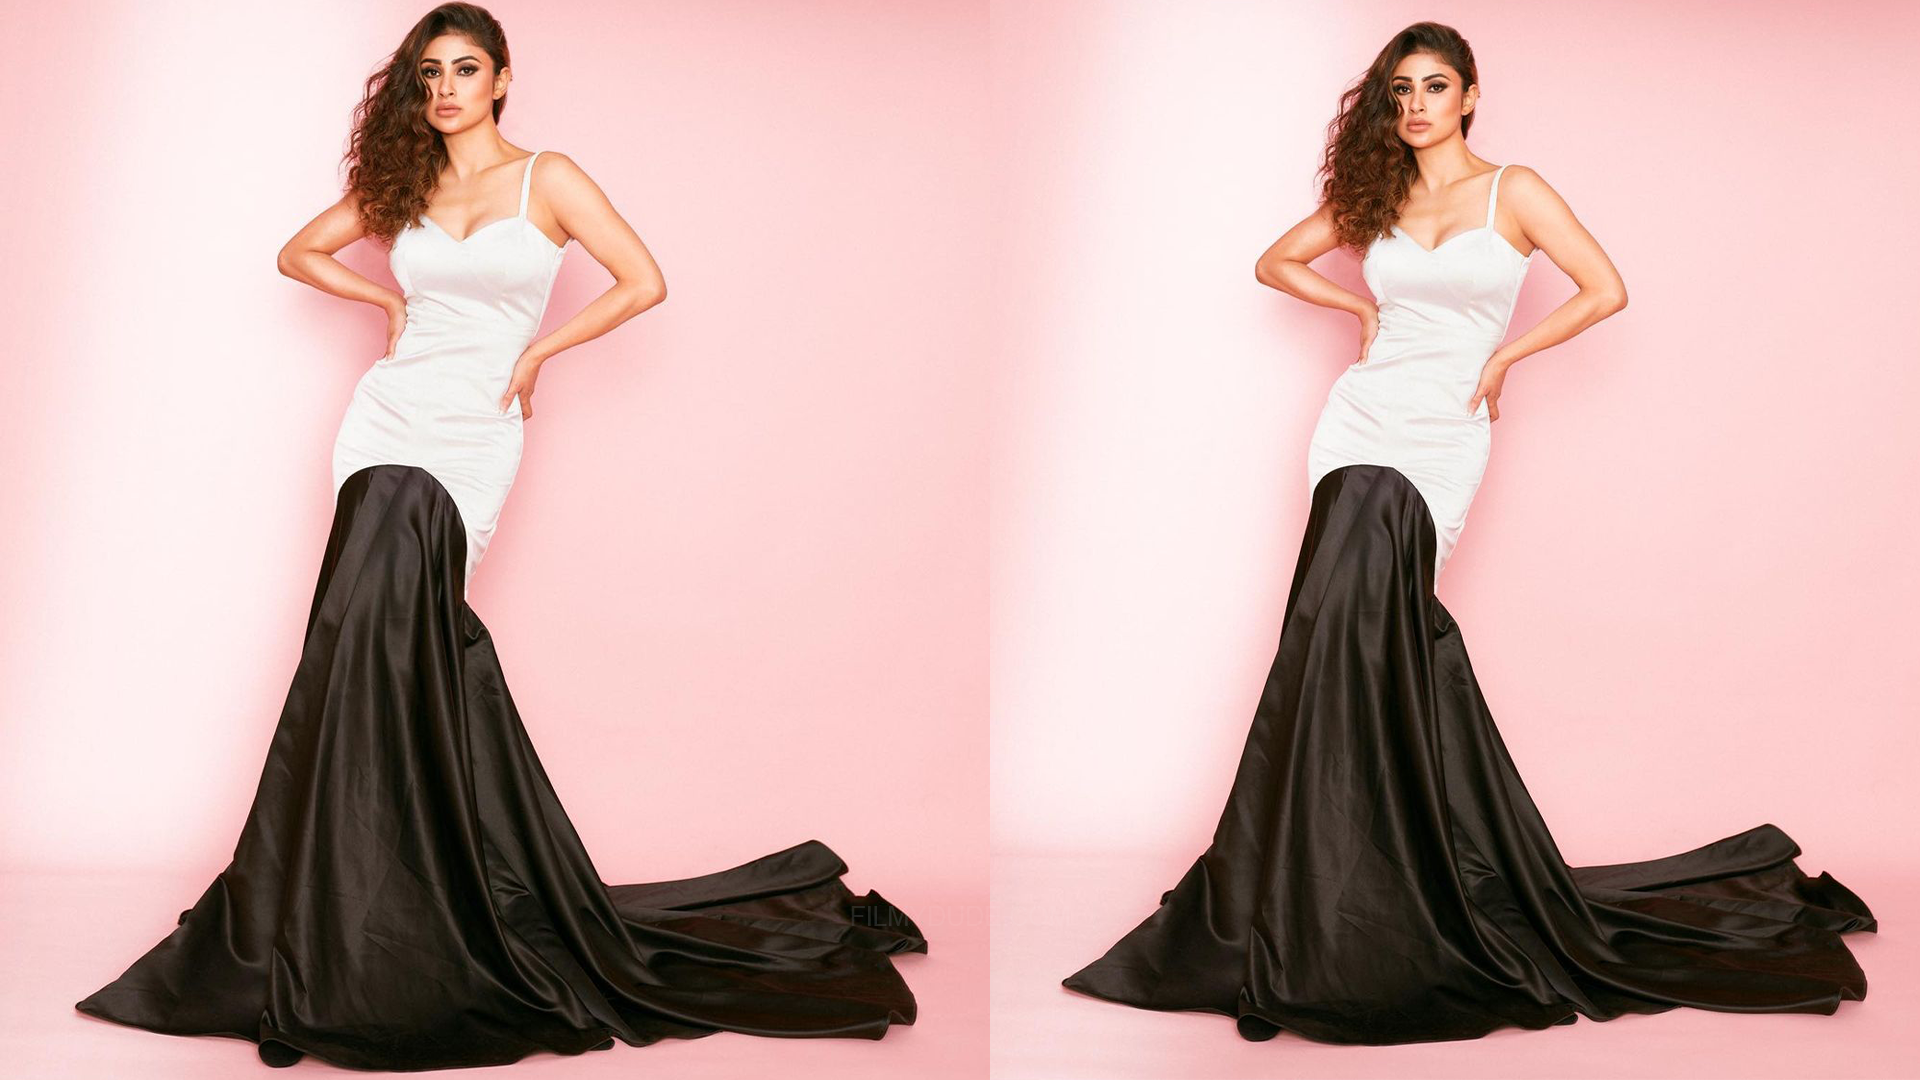 Mouni Roy New Photoshoot- Stuns in a Black-and-White Fishtail Gown